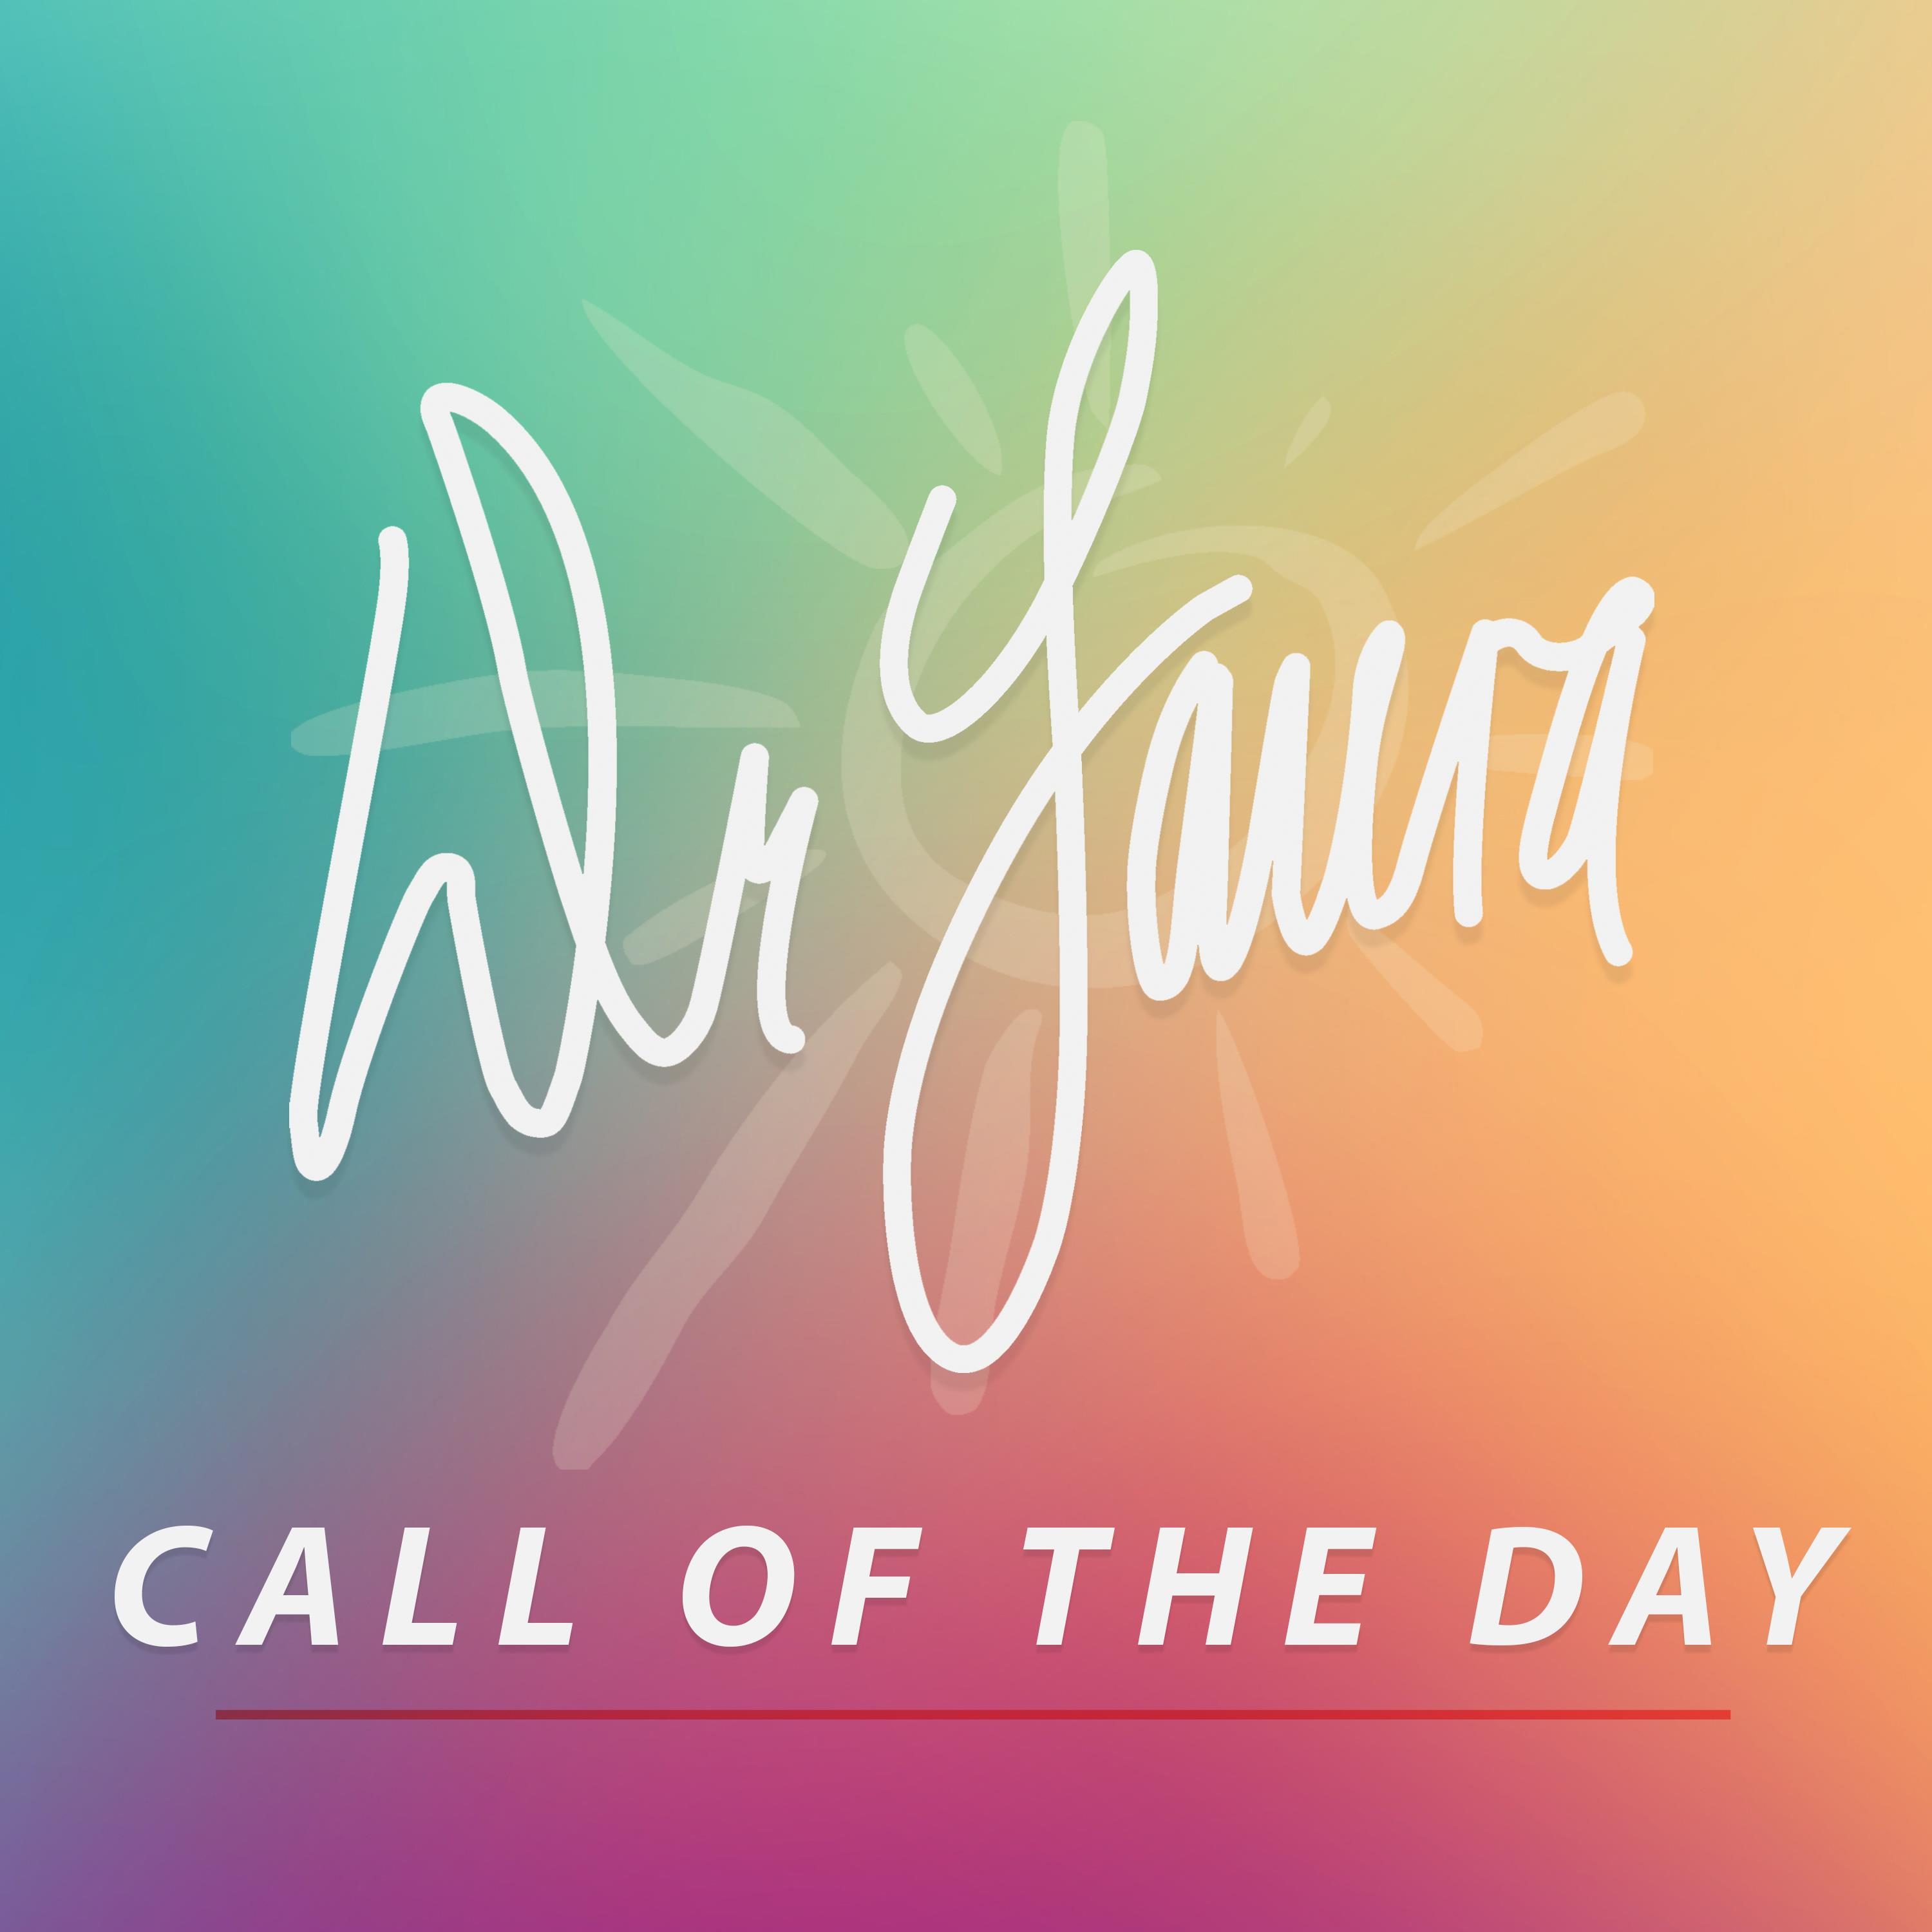 Dr. Laura Call of the Day